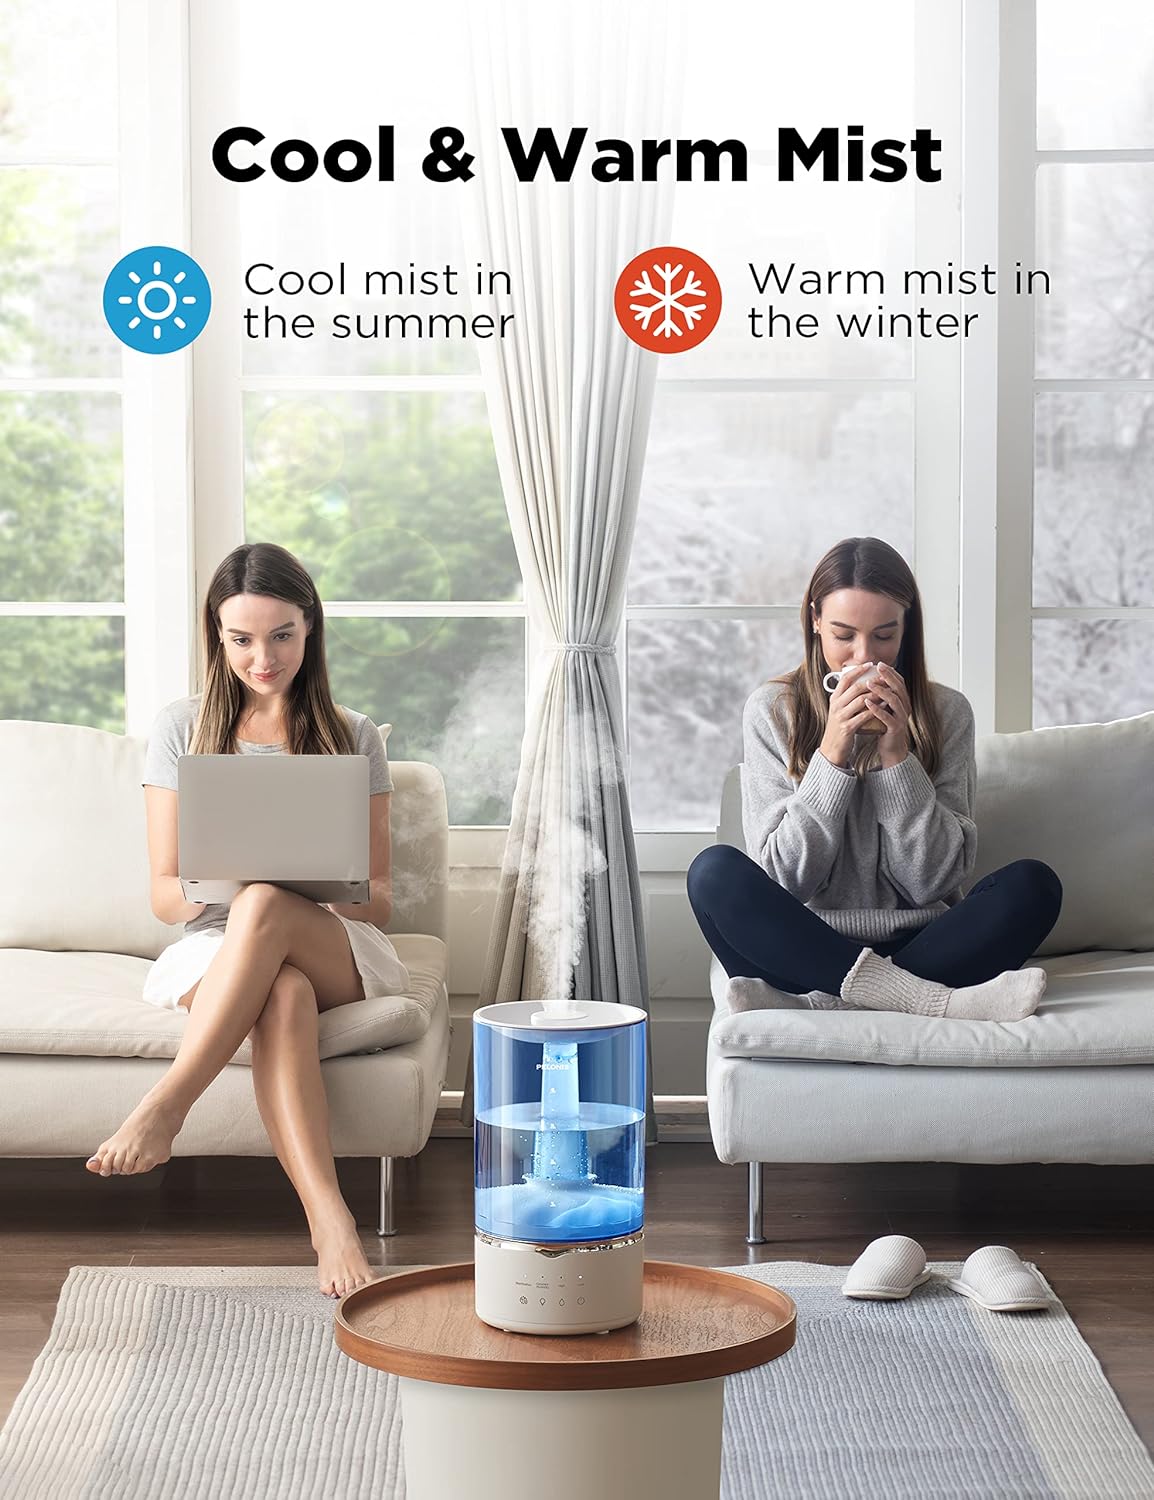 Pelonis Ultrasonic 4L Warm and Cool Mist Humidifiers for Large Room